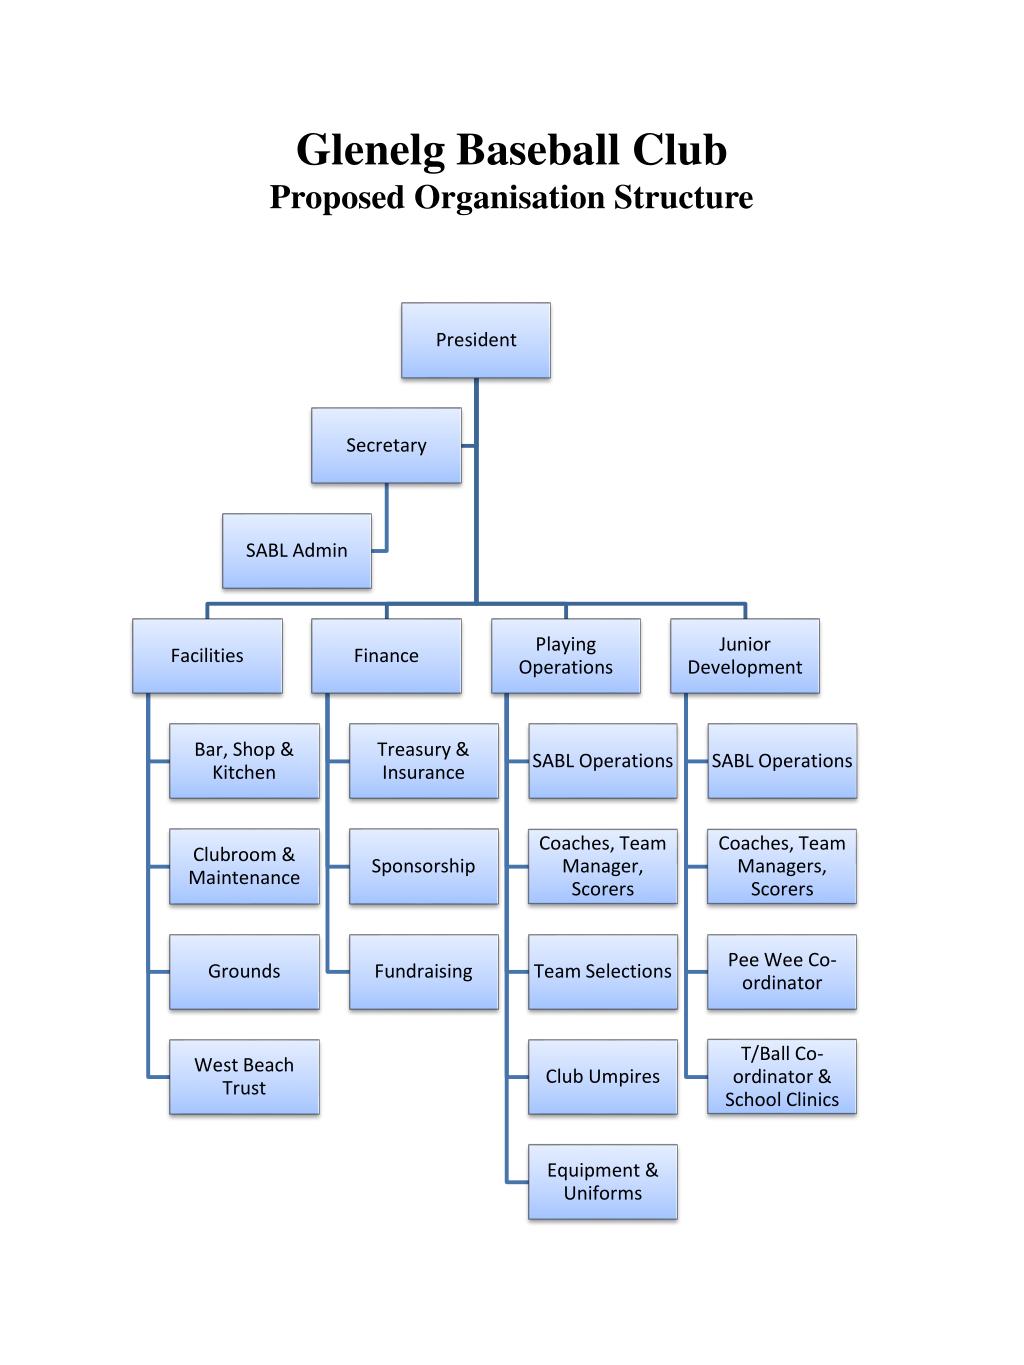 PPT - Glenelg Baseball Club Proposed Organisation Structure PowerPoint  Presentation - ID:1938418